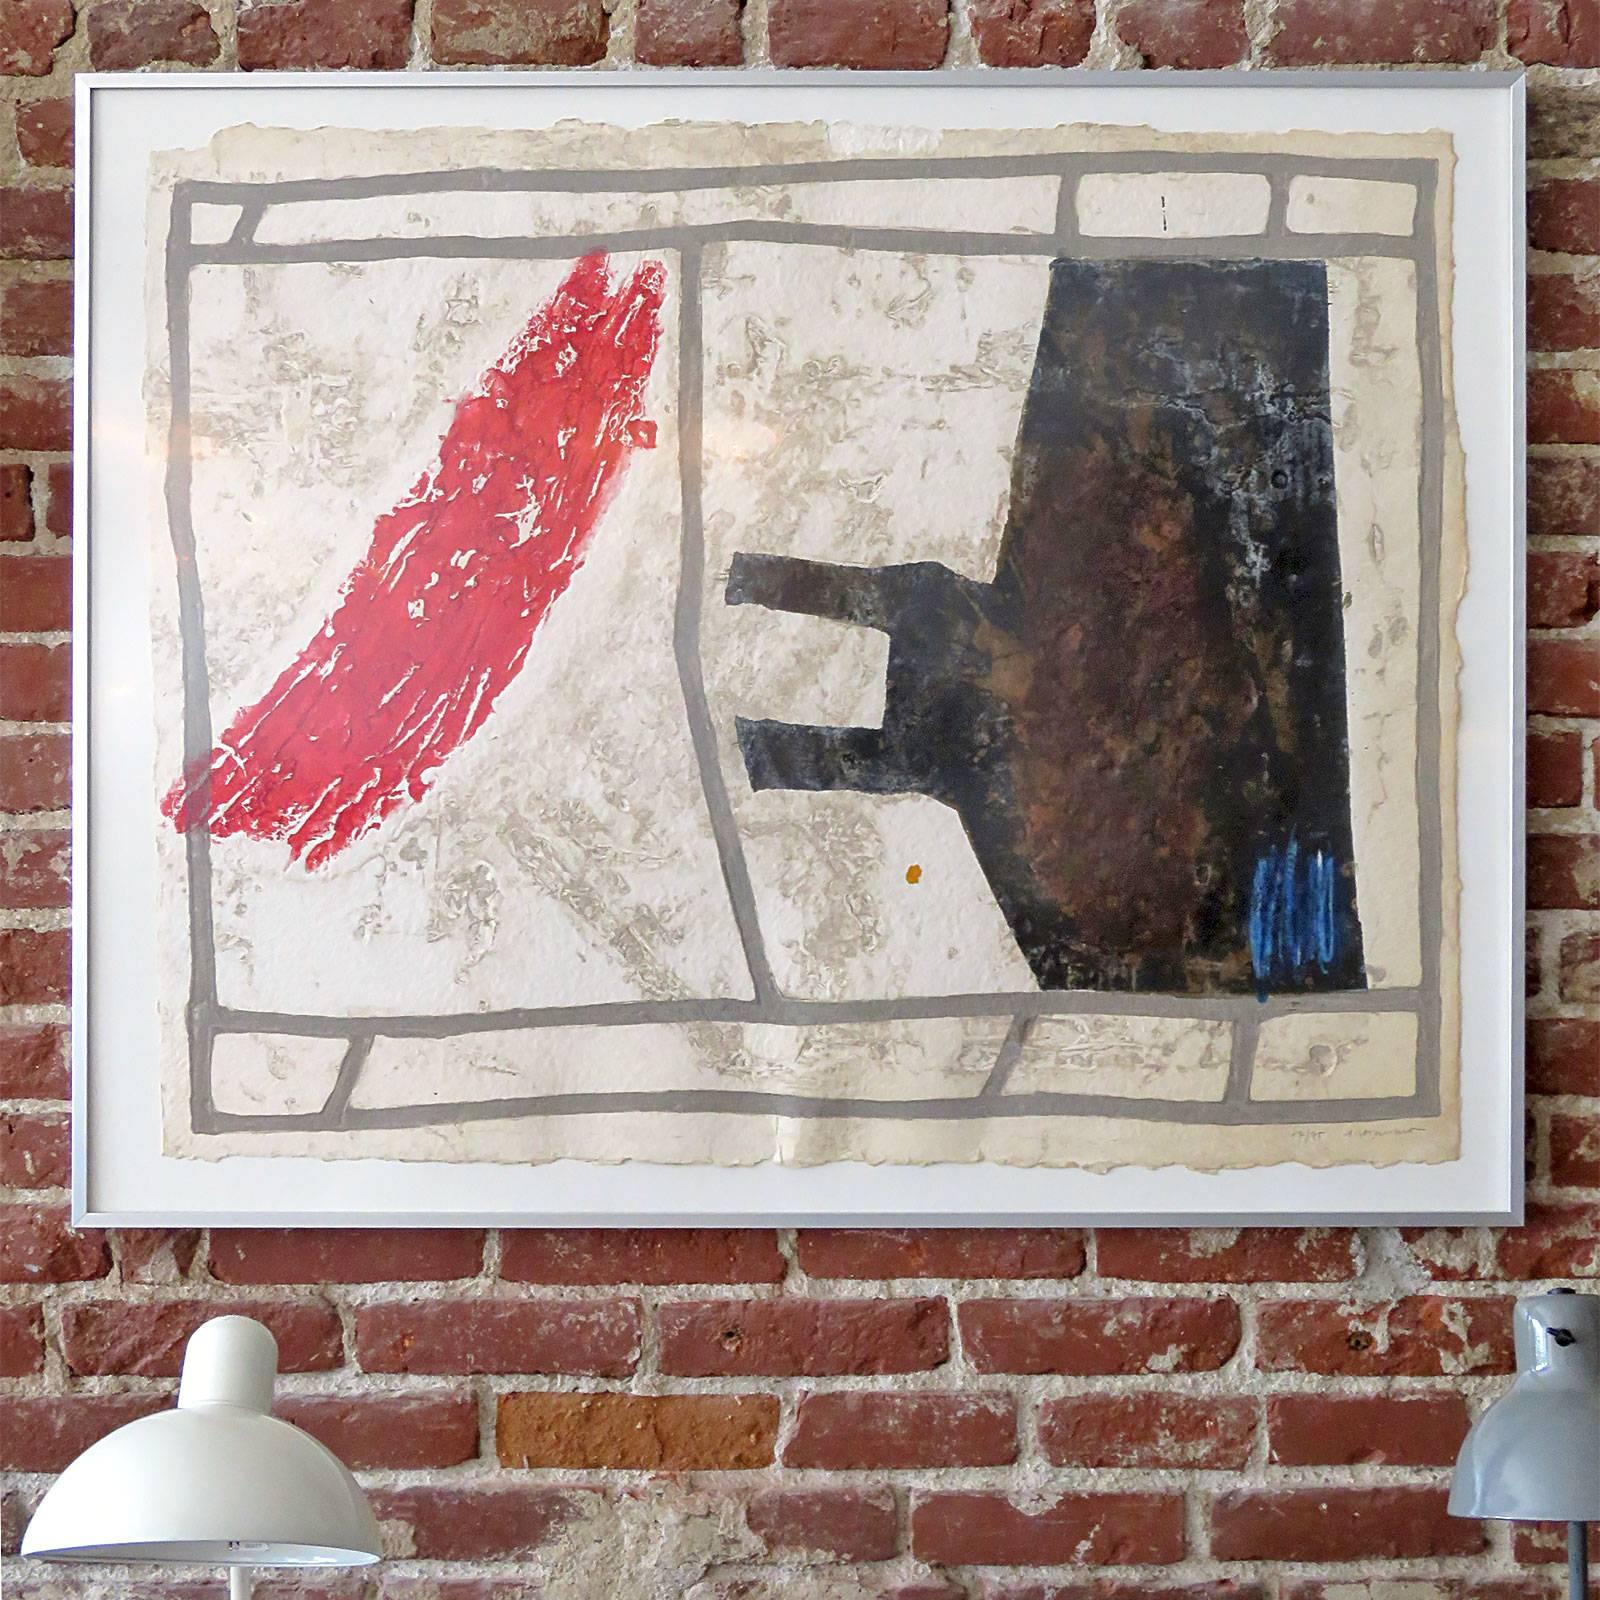 Wonderful original signed and framed carborundum etching ‘Occupation’ by French artist James Coignard (1925-2008), pencil signed and numbered by Coignard: 17/75, image size: 43″ x 34″, framed.